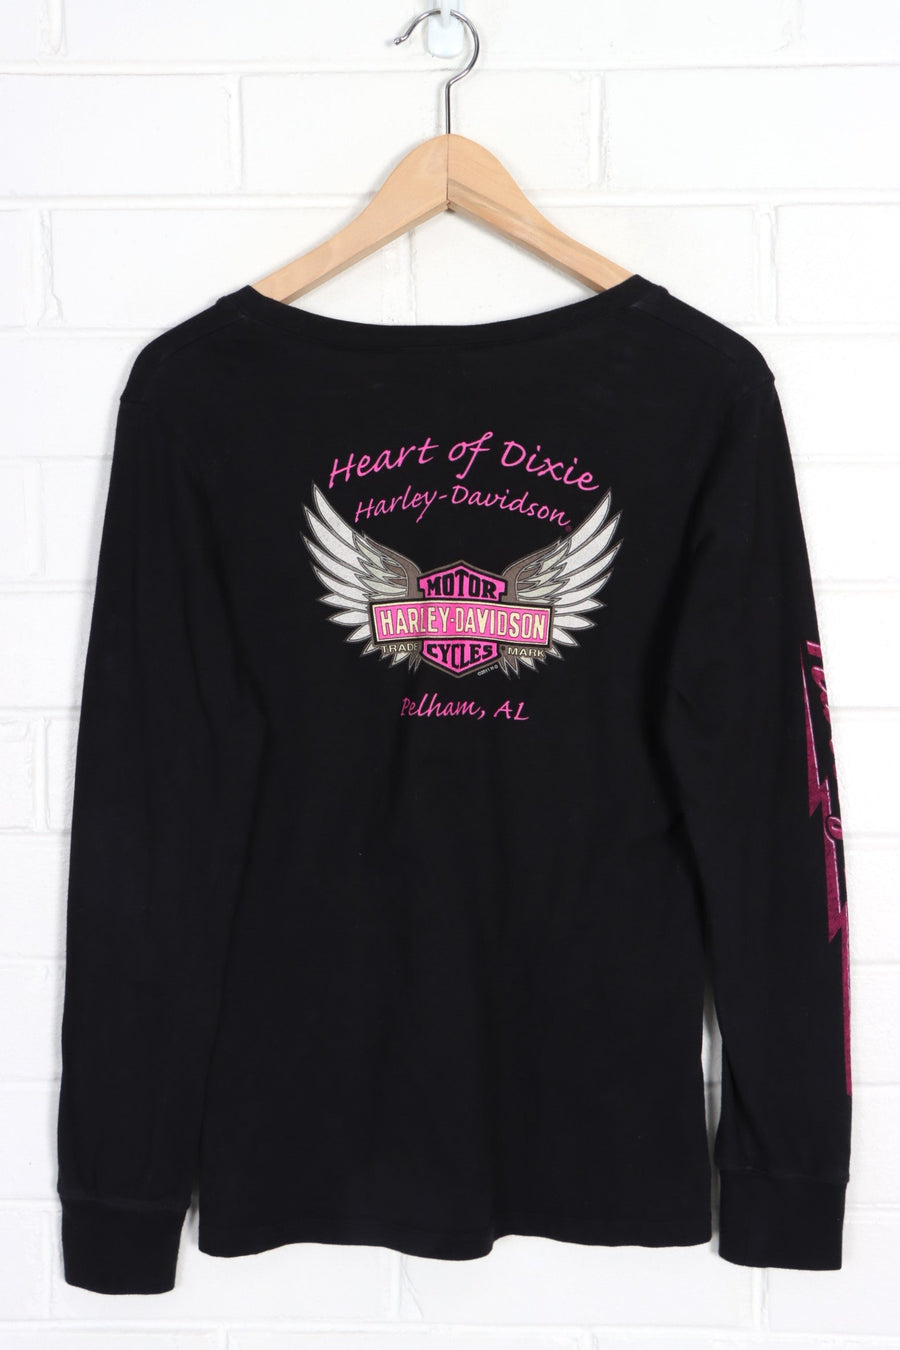 HARLEY DAVIDSON Heart of Dixie Pink Y2K All Over Long Sleeve Tee (Women's M)